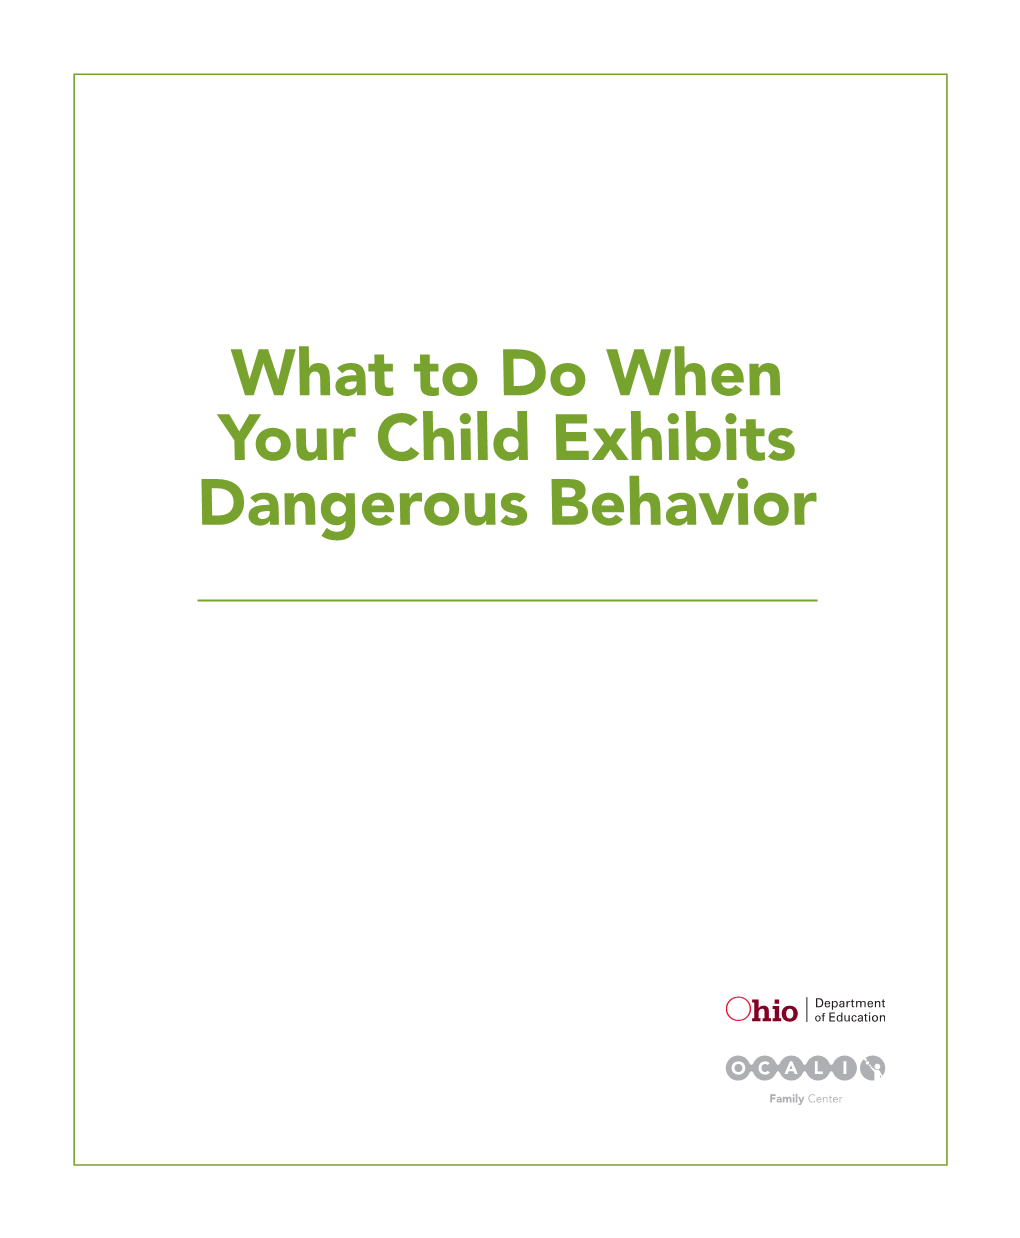 What to Do When Your Child Exhibits Dangerous Behavior